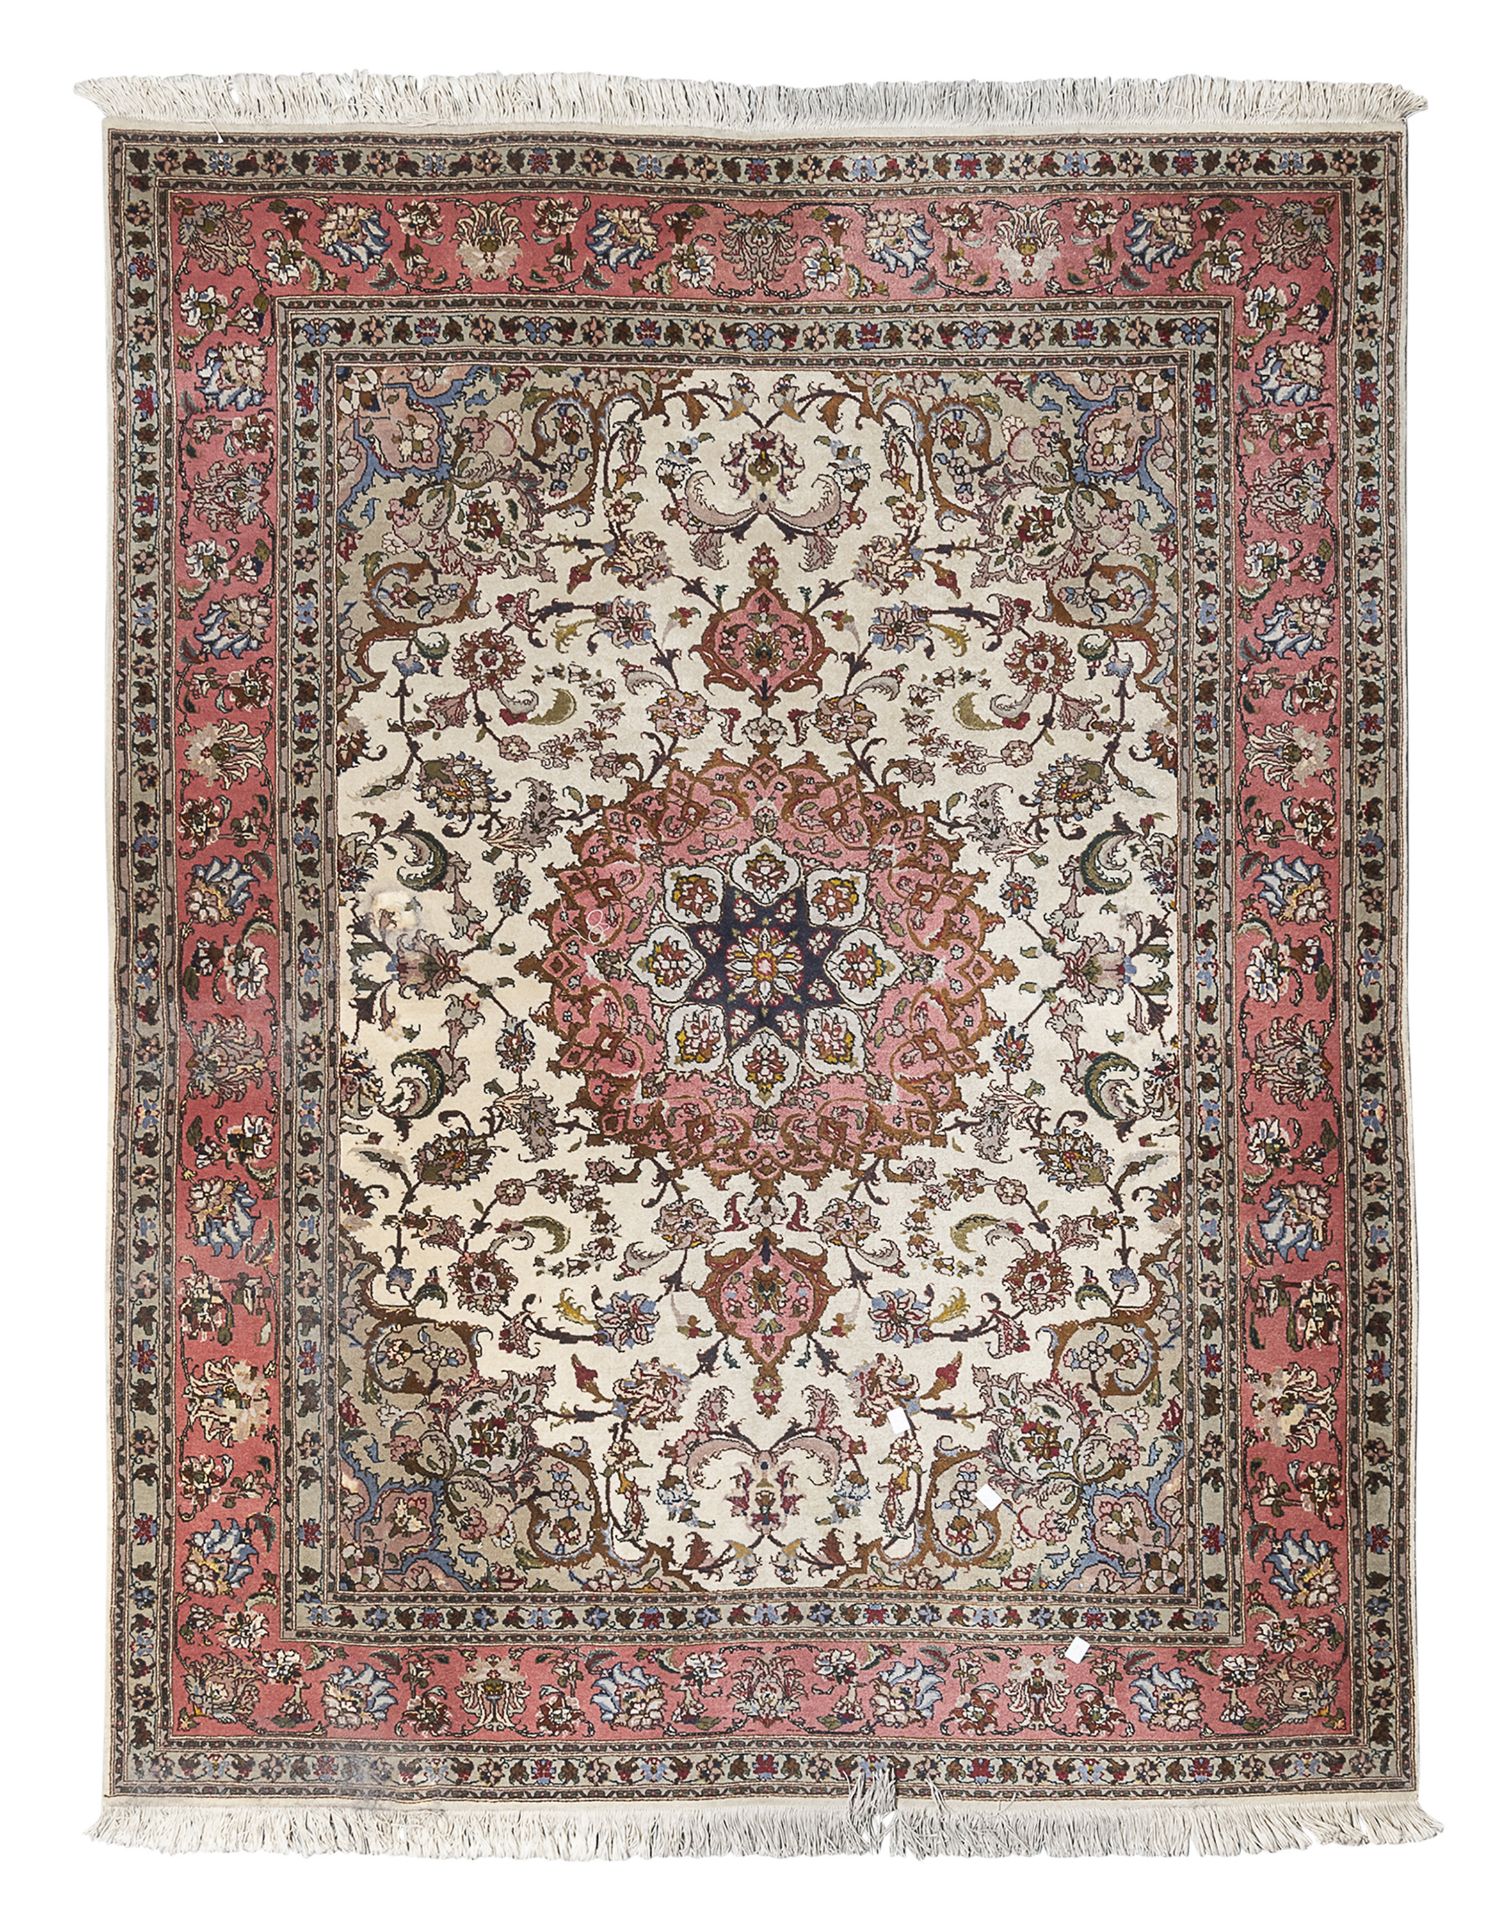 NICE ISFAHAN CARPET FIRST HALF OF THE 20TH CENTURY